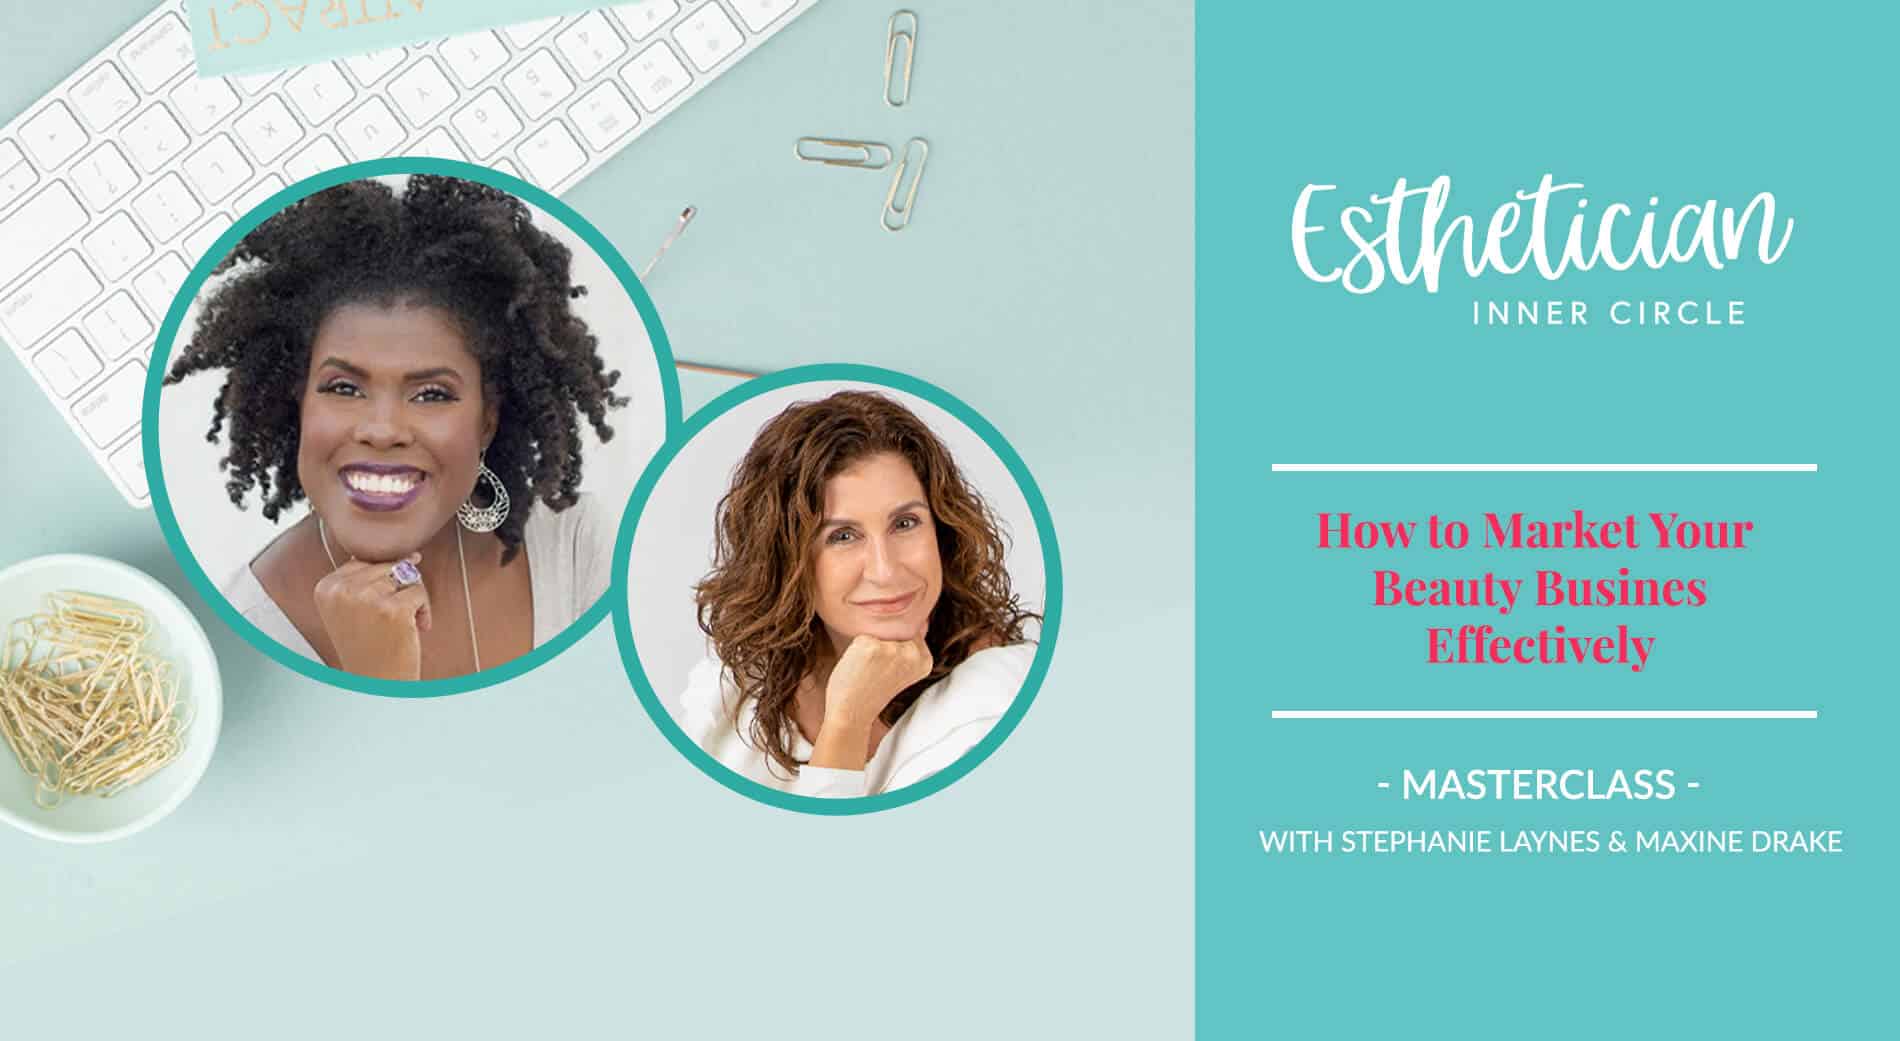 how to market your beauty business effectively webinar